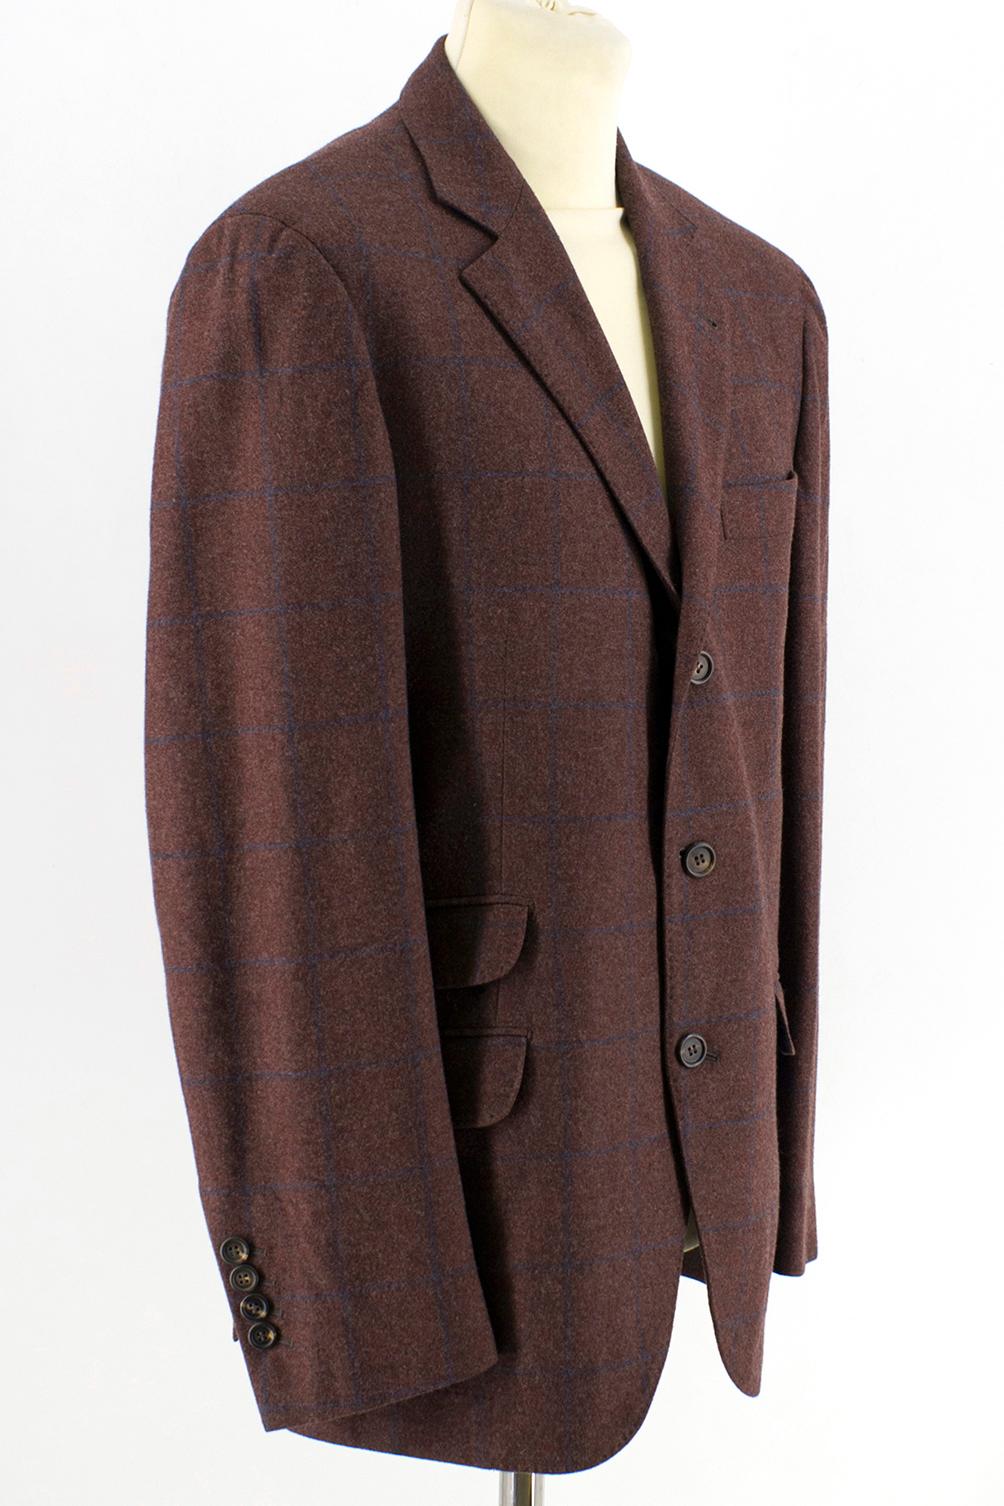 Brunello Cucinelli Burgendy Button Up Check Blazer 

One chest Pocket 
Two Pockets on either side of the waist 
Half Lining 
Medium Weight 
Four Buttons on either side of the Sleeves 

Please note, these items are pre-owned and may show signs